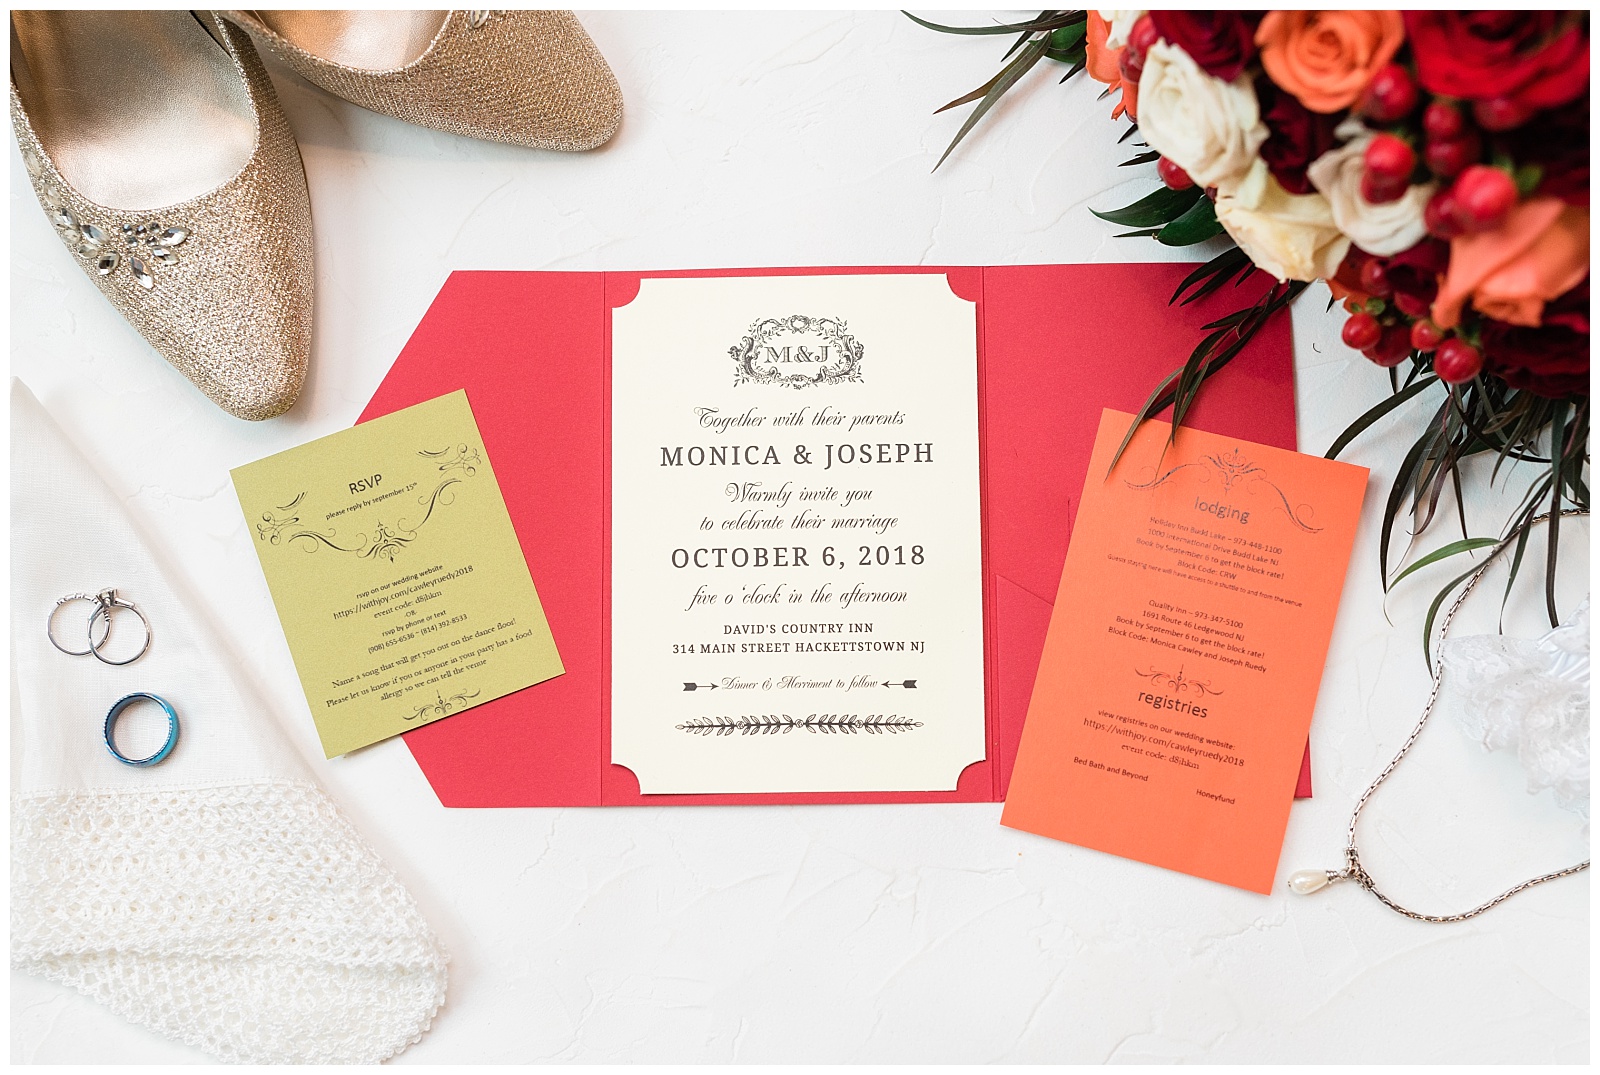 Bride Details,David's Country Inn,Fall Wedding,Hackettstown,Invitation Suite,NJ Wedding Photographer,Red,Shoes,